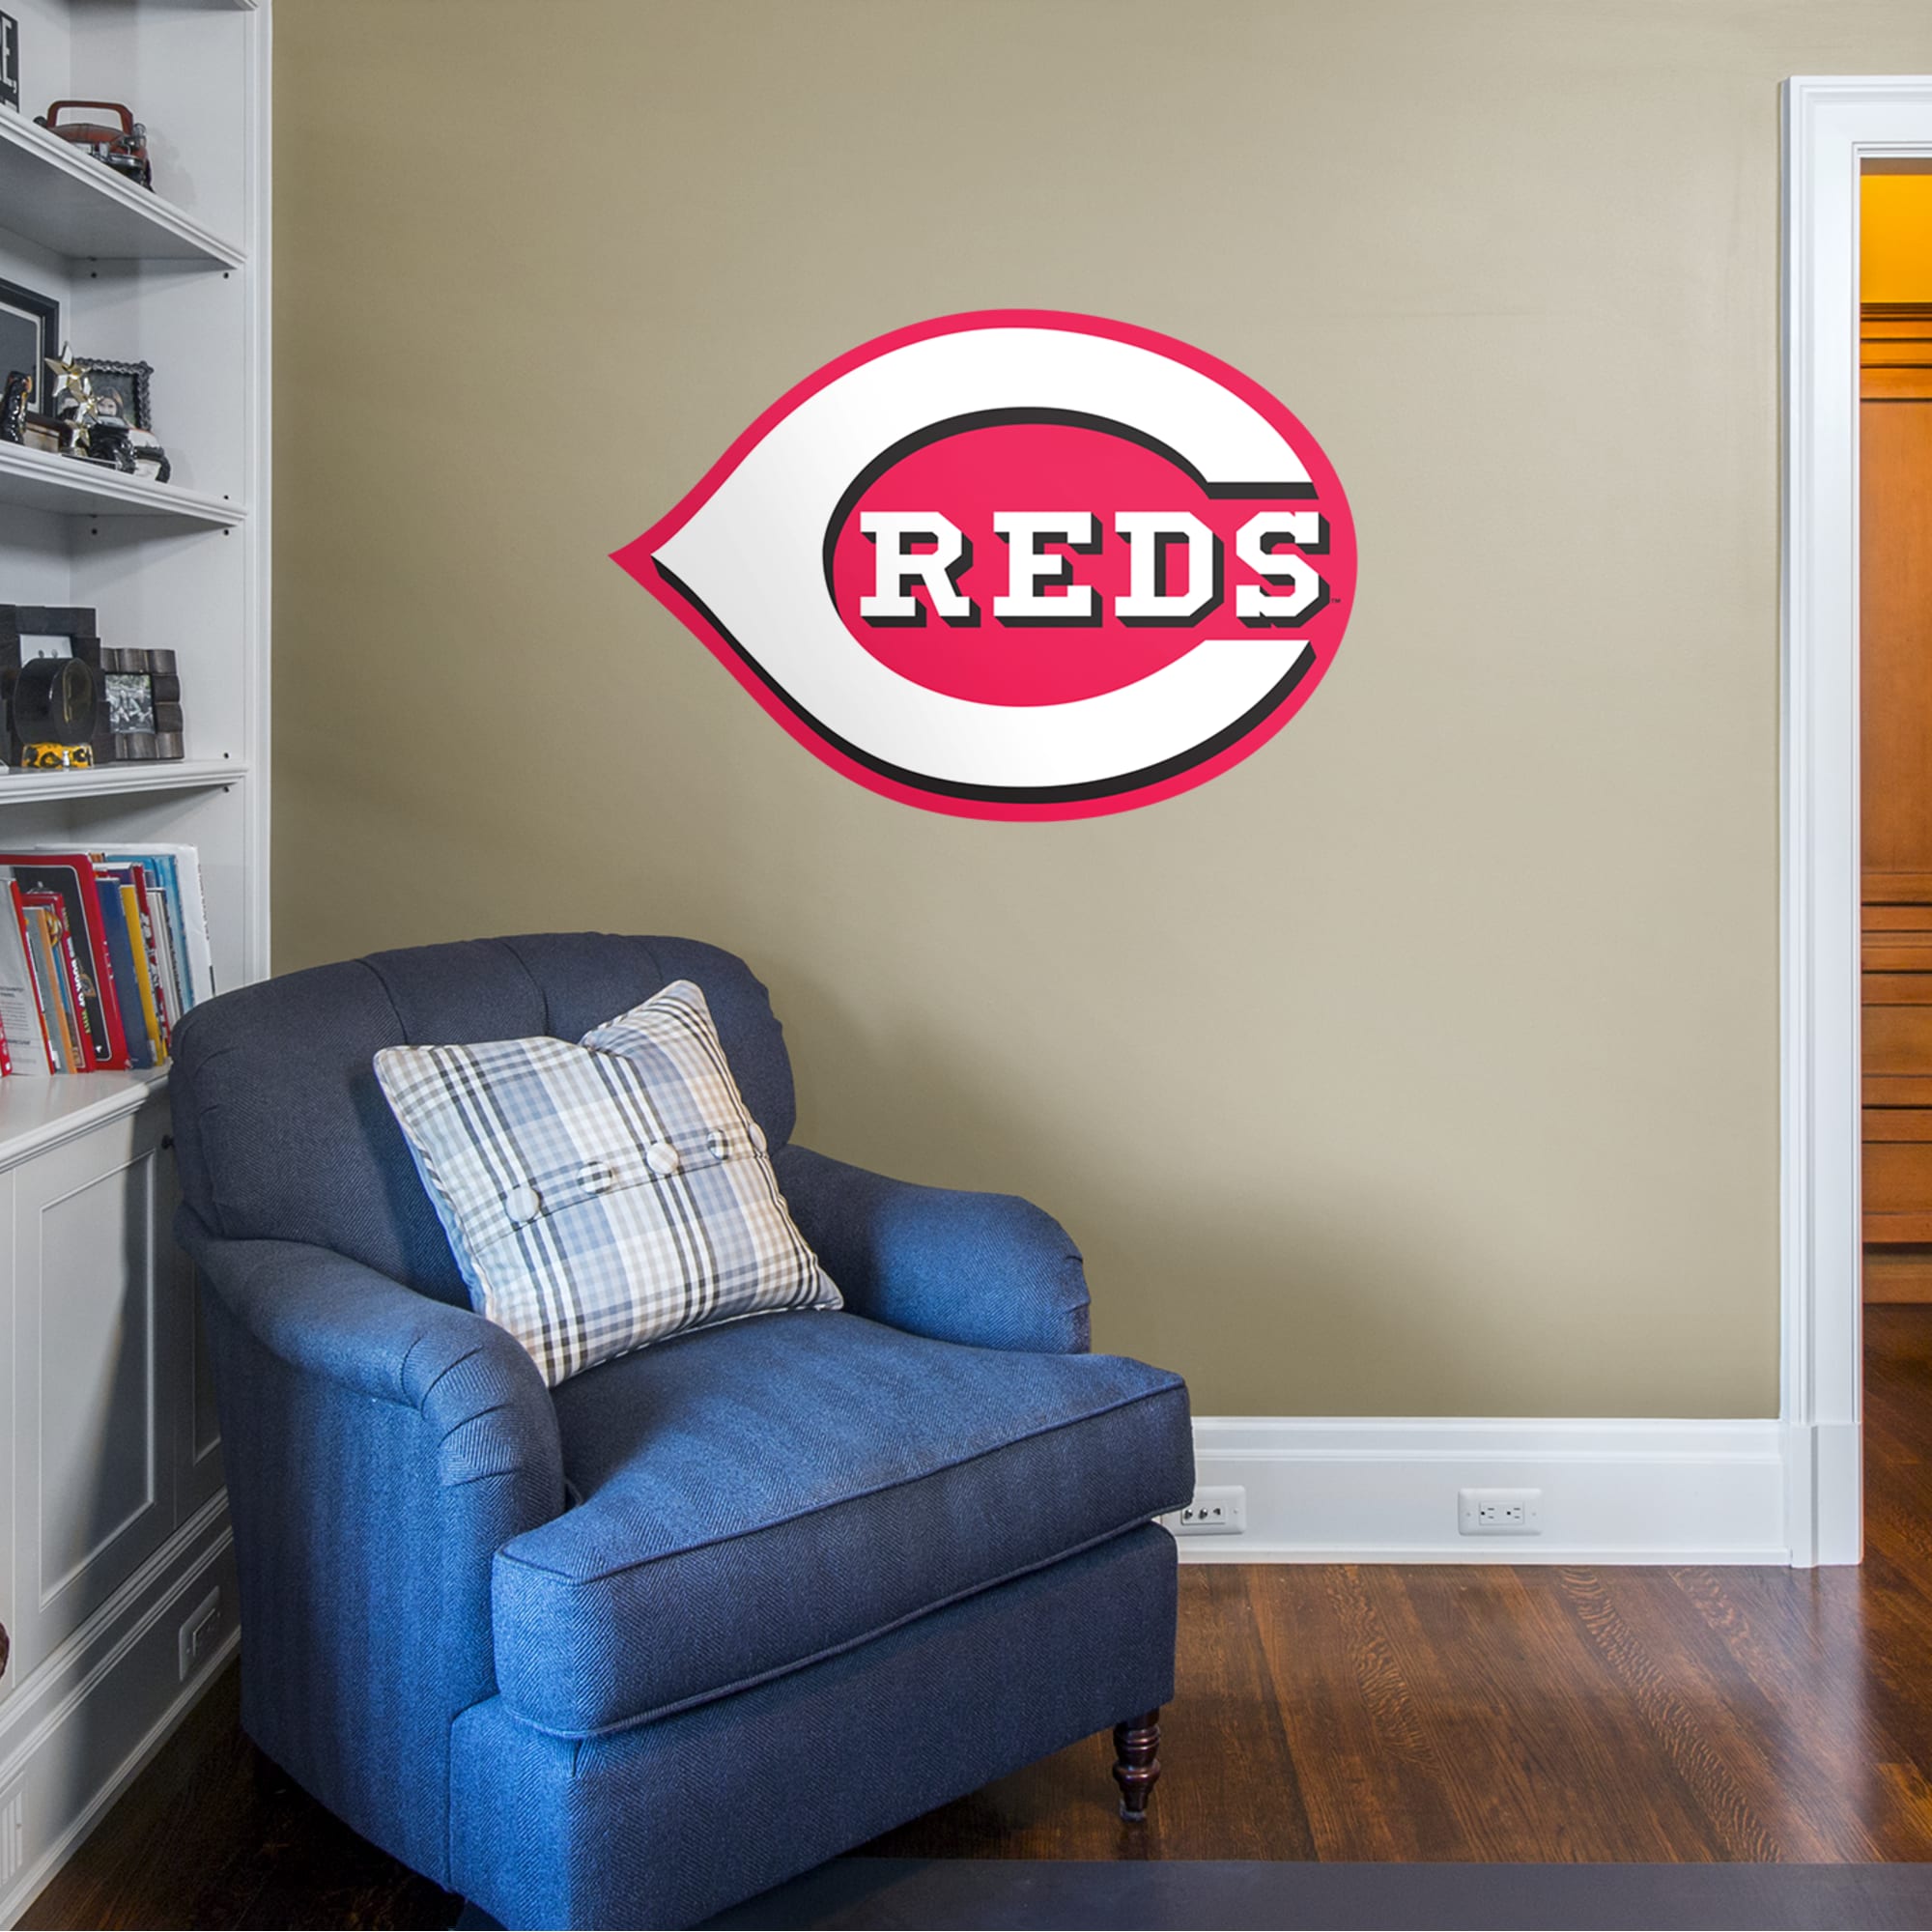 Cincinnati Reds: Logo - Officially Licensed MLB Removable Wall Decal Giant Logo (45"W x 31"H) by Fathead | Vinyl